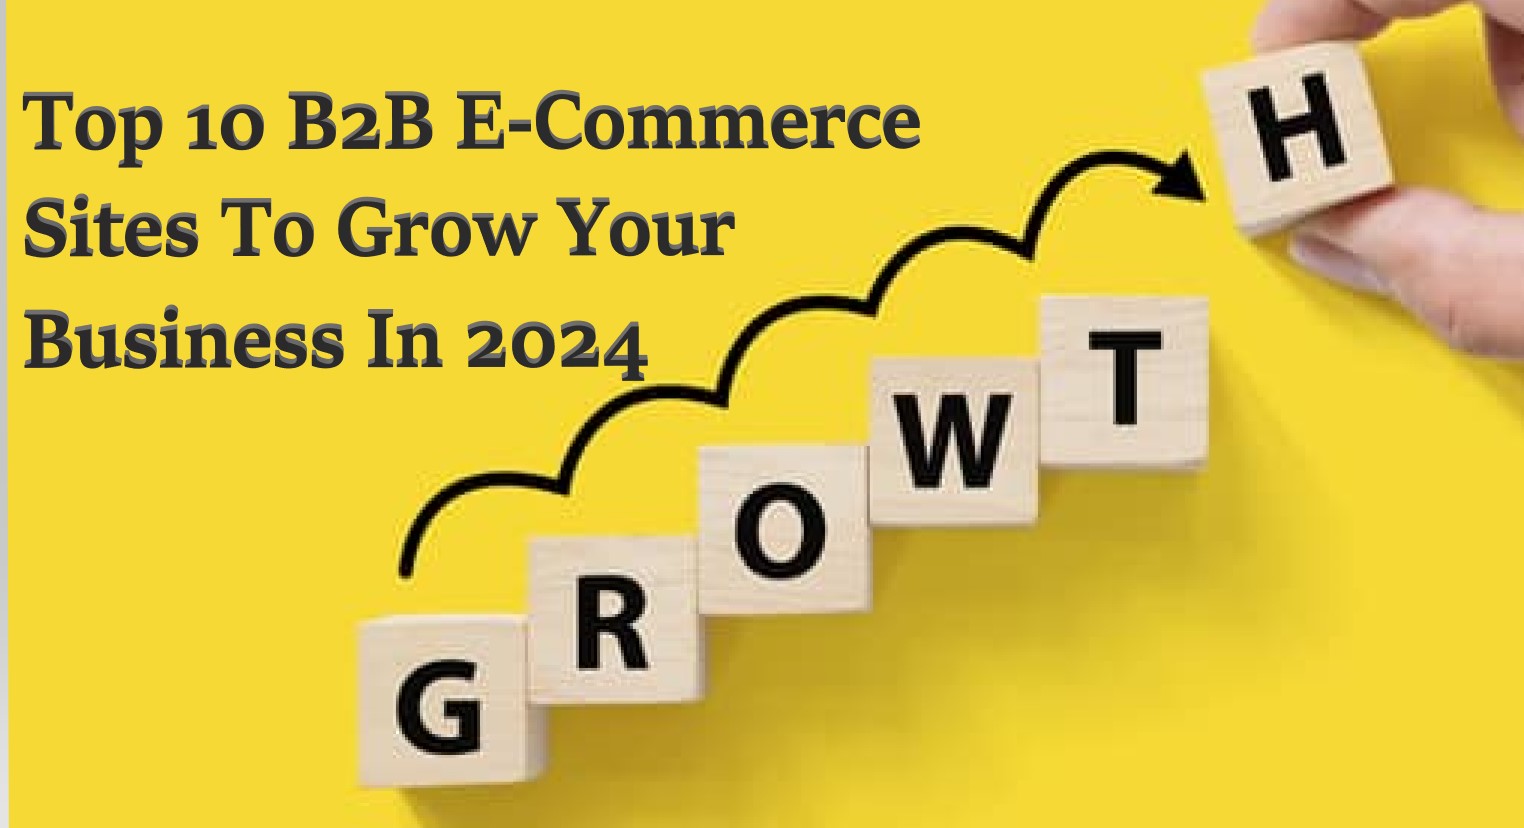 10 Top B2B E-Commerce Sites to Grow Your Business In 2024